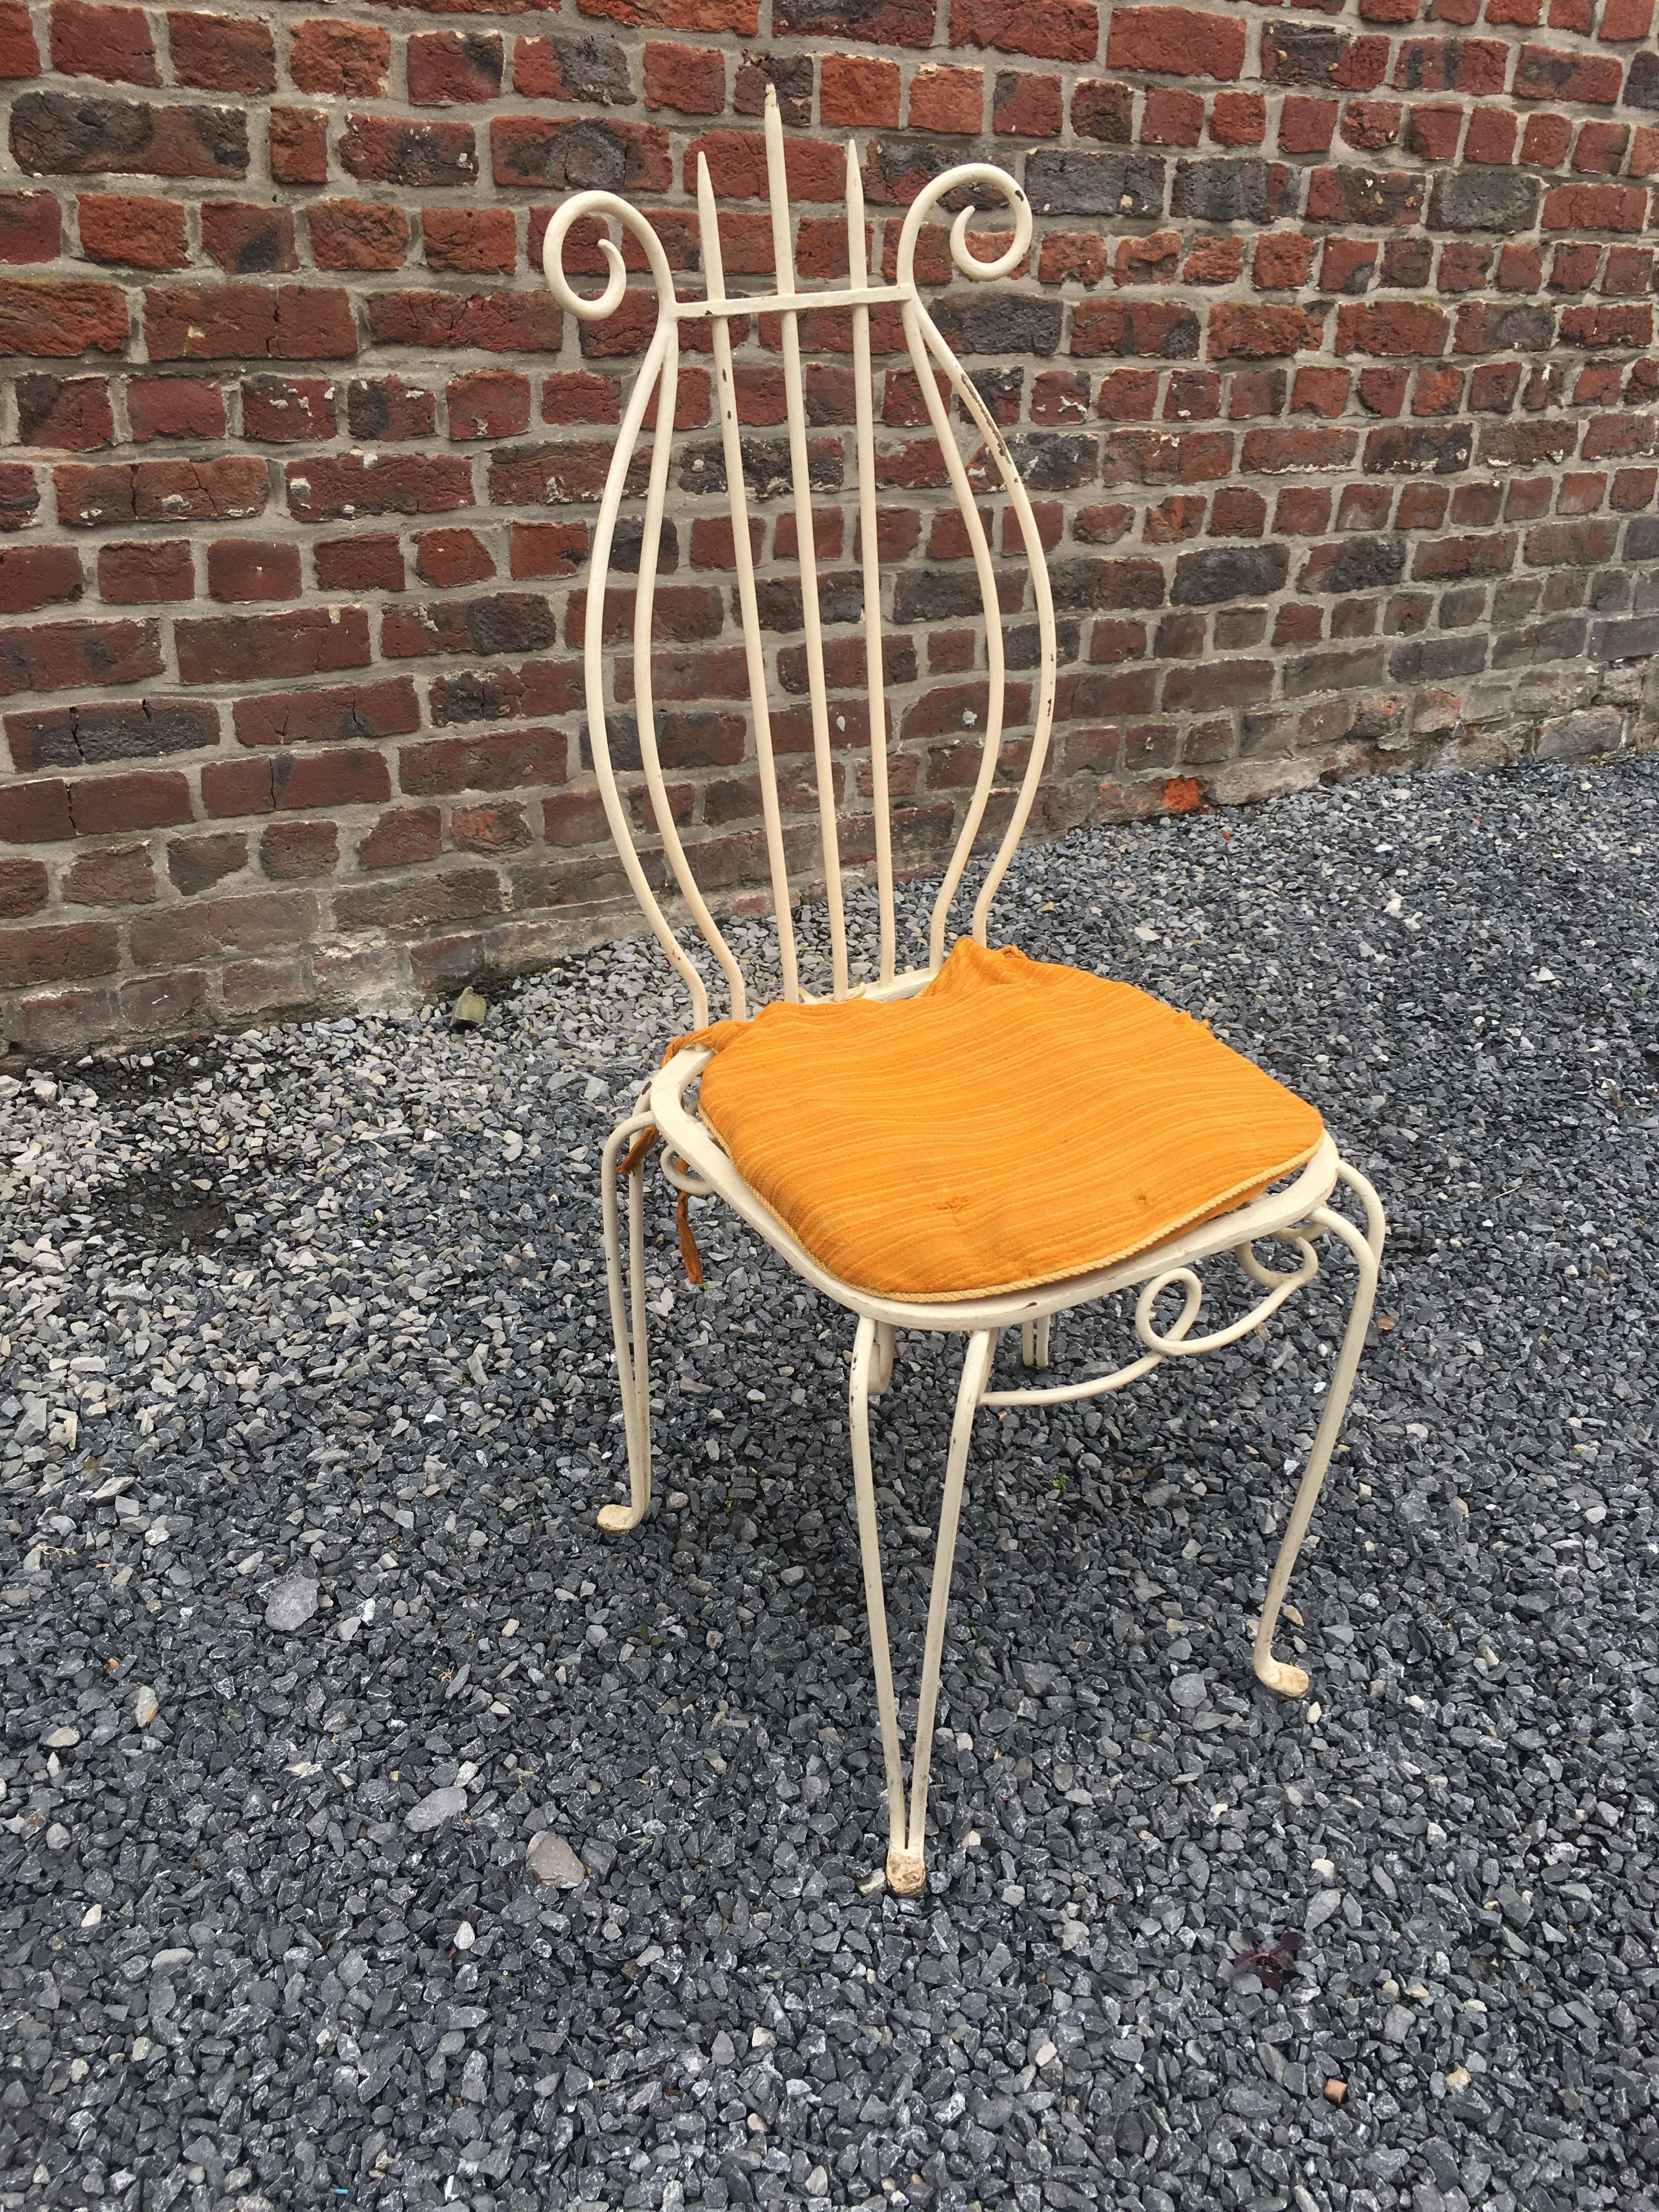 Neo Romantic Art Deco Chair in Lacquered Metal, circa 1940 In Good Condition For Sale In Saint-Ouen, FR